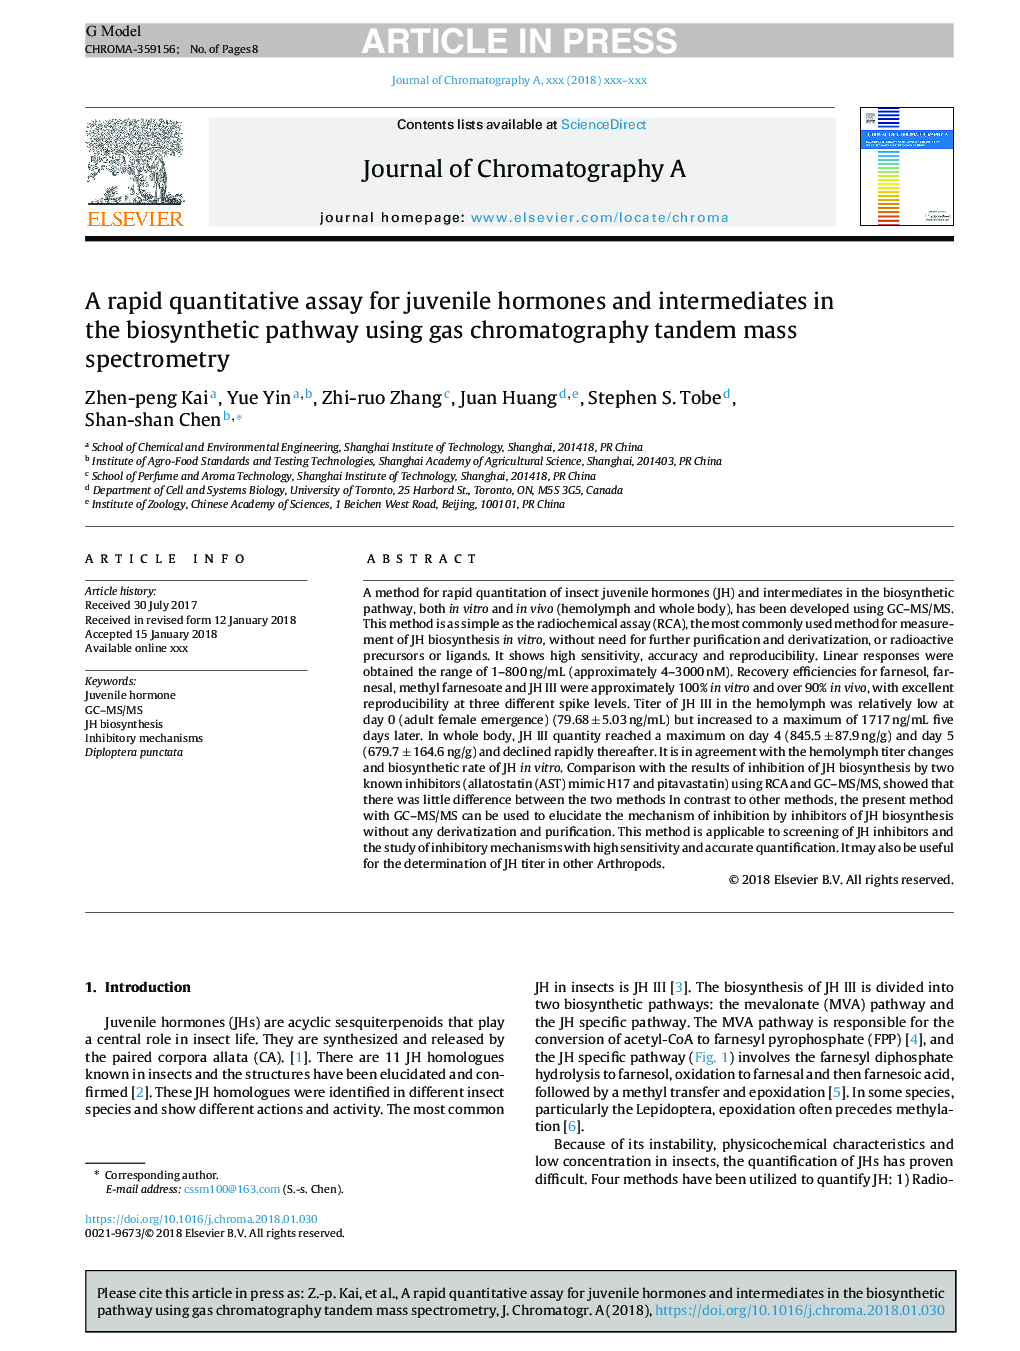 A rapid quantitative assay for juvenile hormones and intermediates in the biosynthetic pathway using gas chromatography tandem mass spectrometry